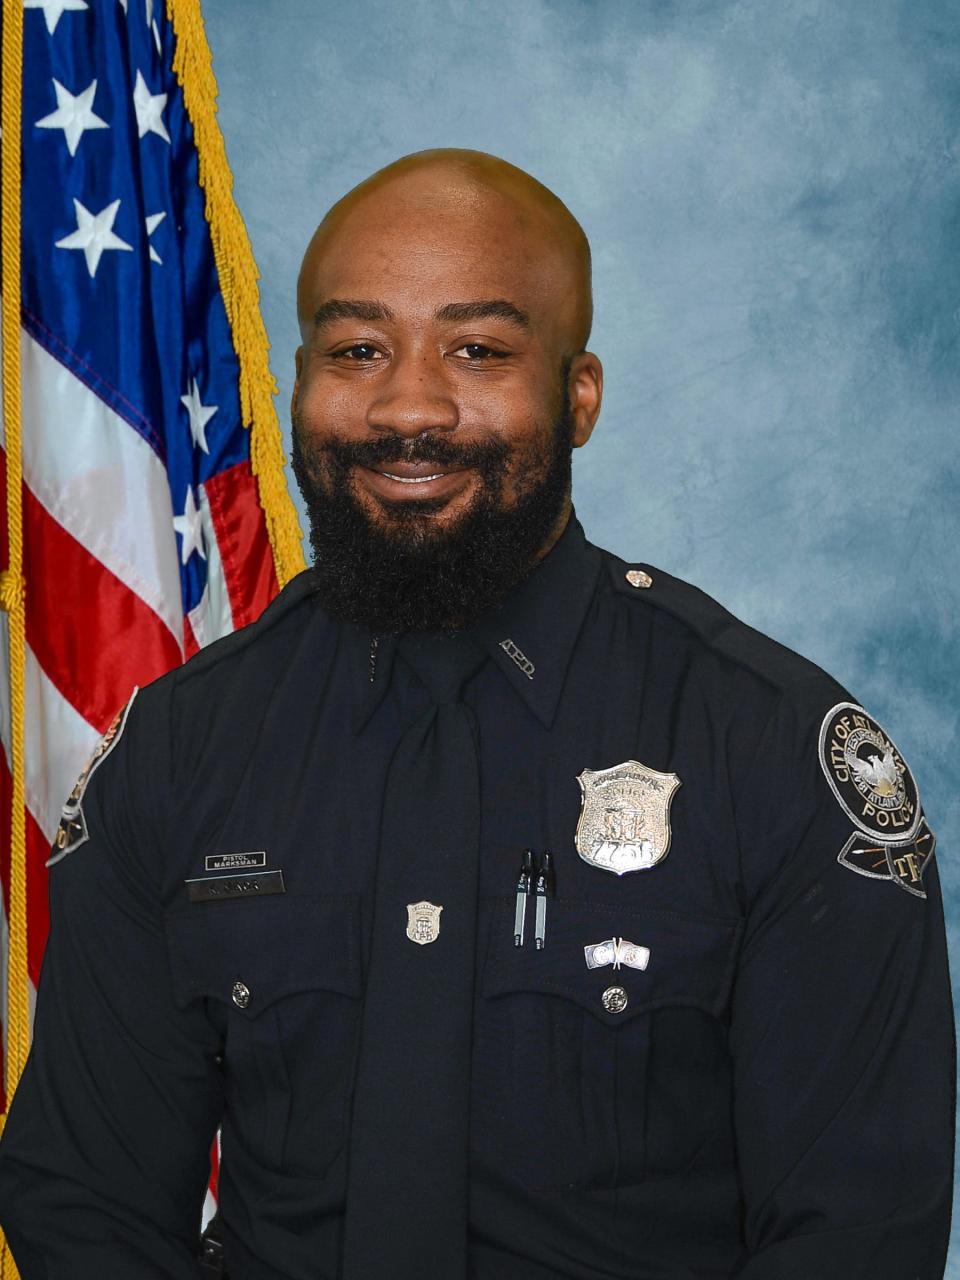 Former Atlanta Police officer Koby Minor is accused of killing his Lyft driver, reports state.